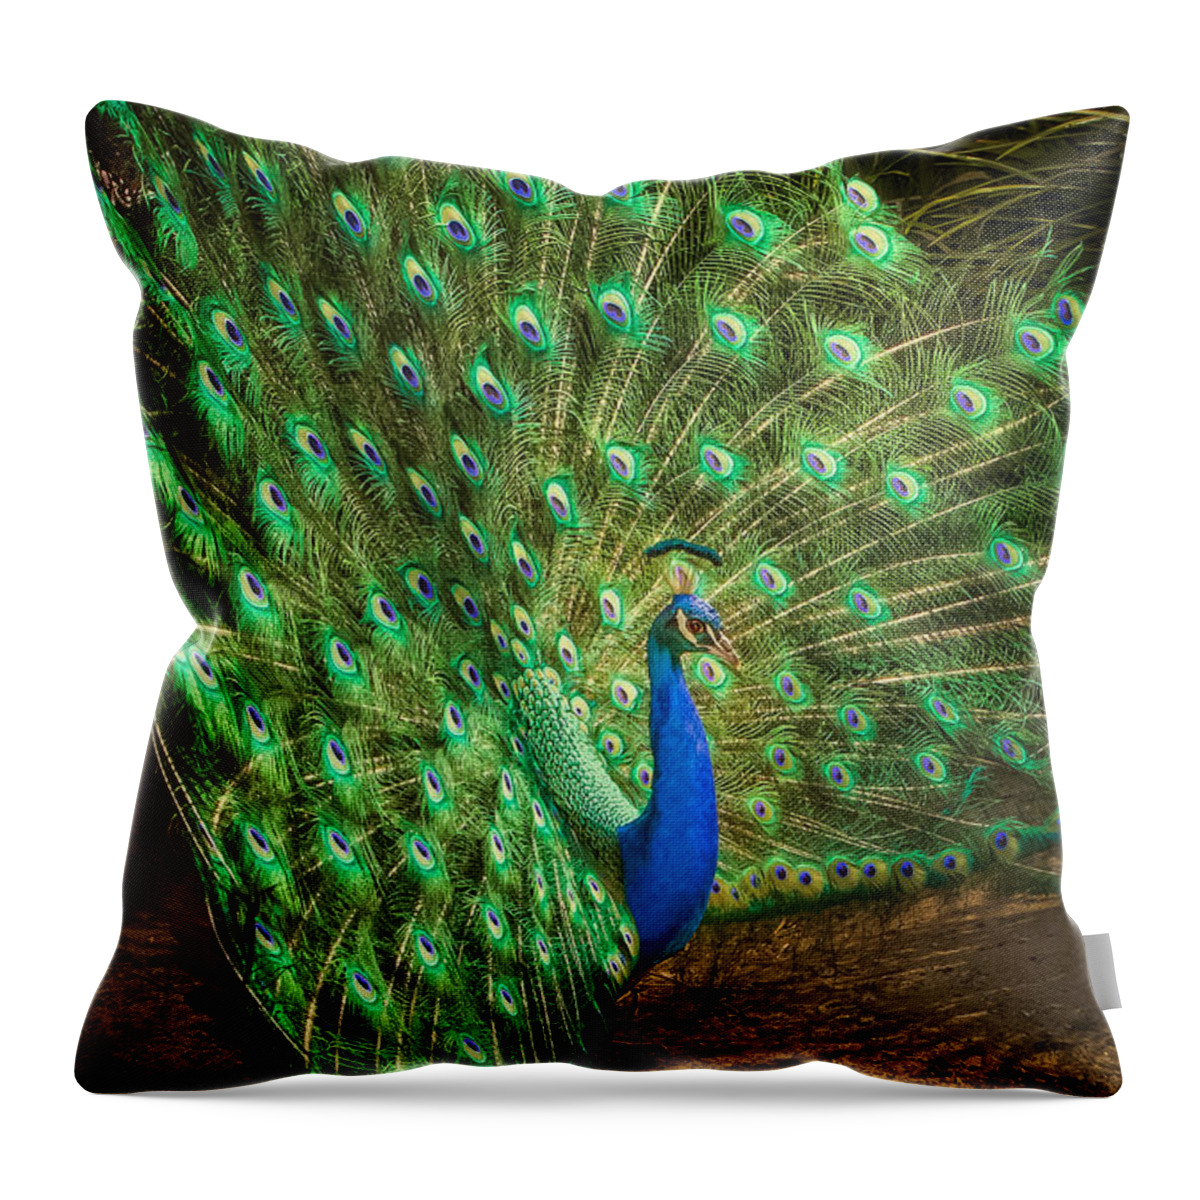 Animals Throw Pillow featuring the photograph India Blue Peacock by Rikk Flohr